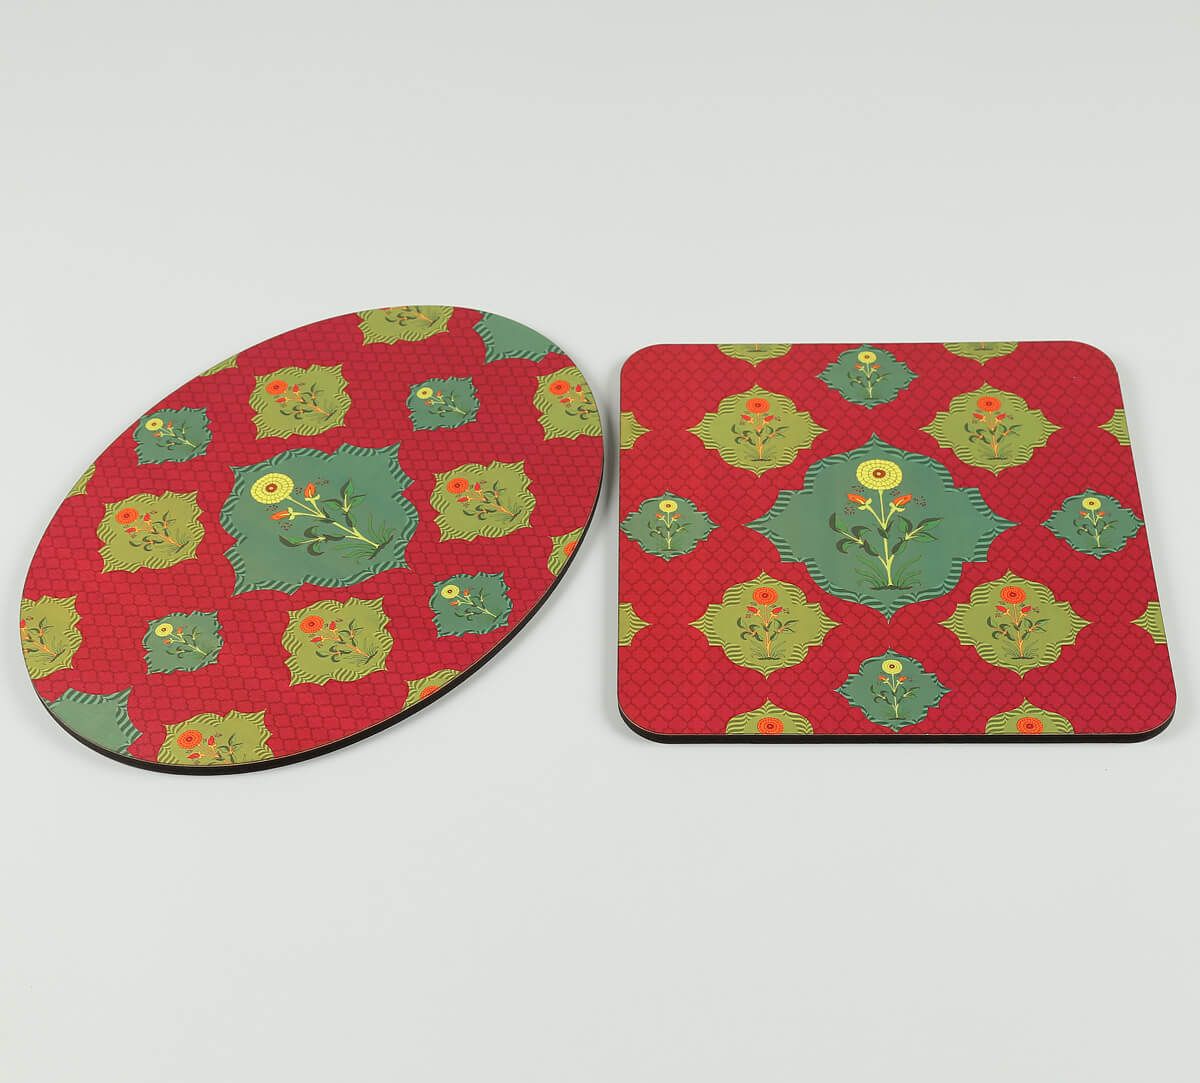 India Circus by Krsnaa Mehta Blossom Tales Trivet Set of 2